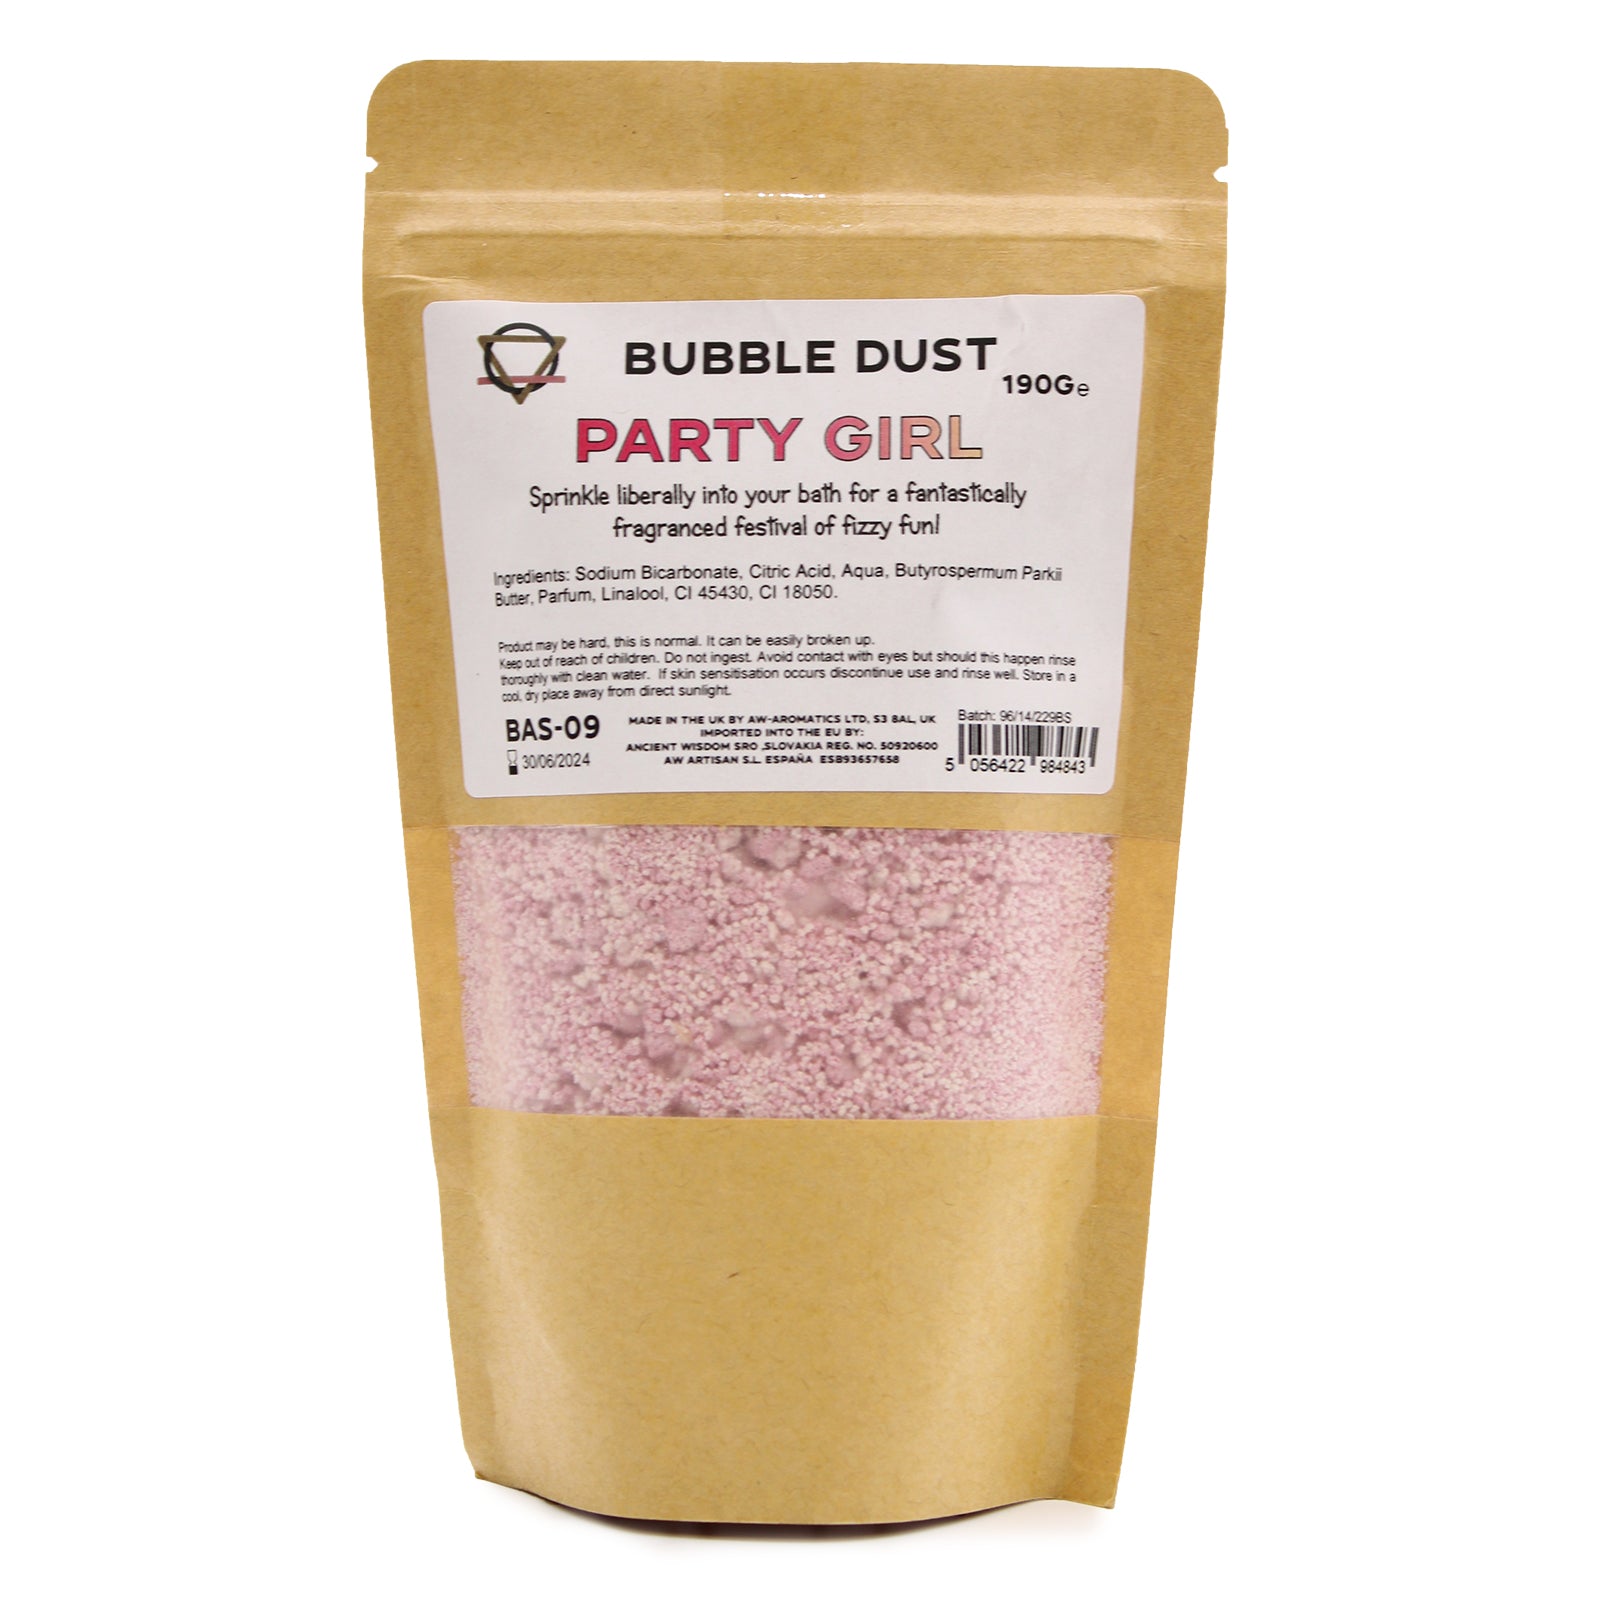 View Party Girl Bath Dust 190g information